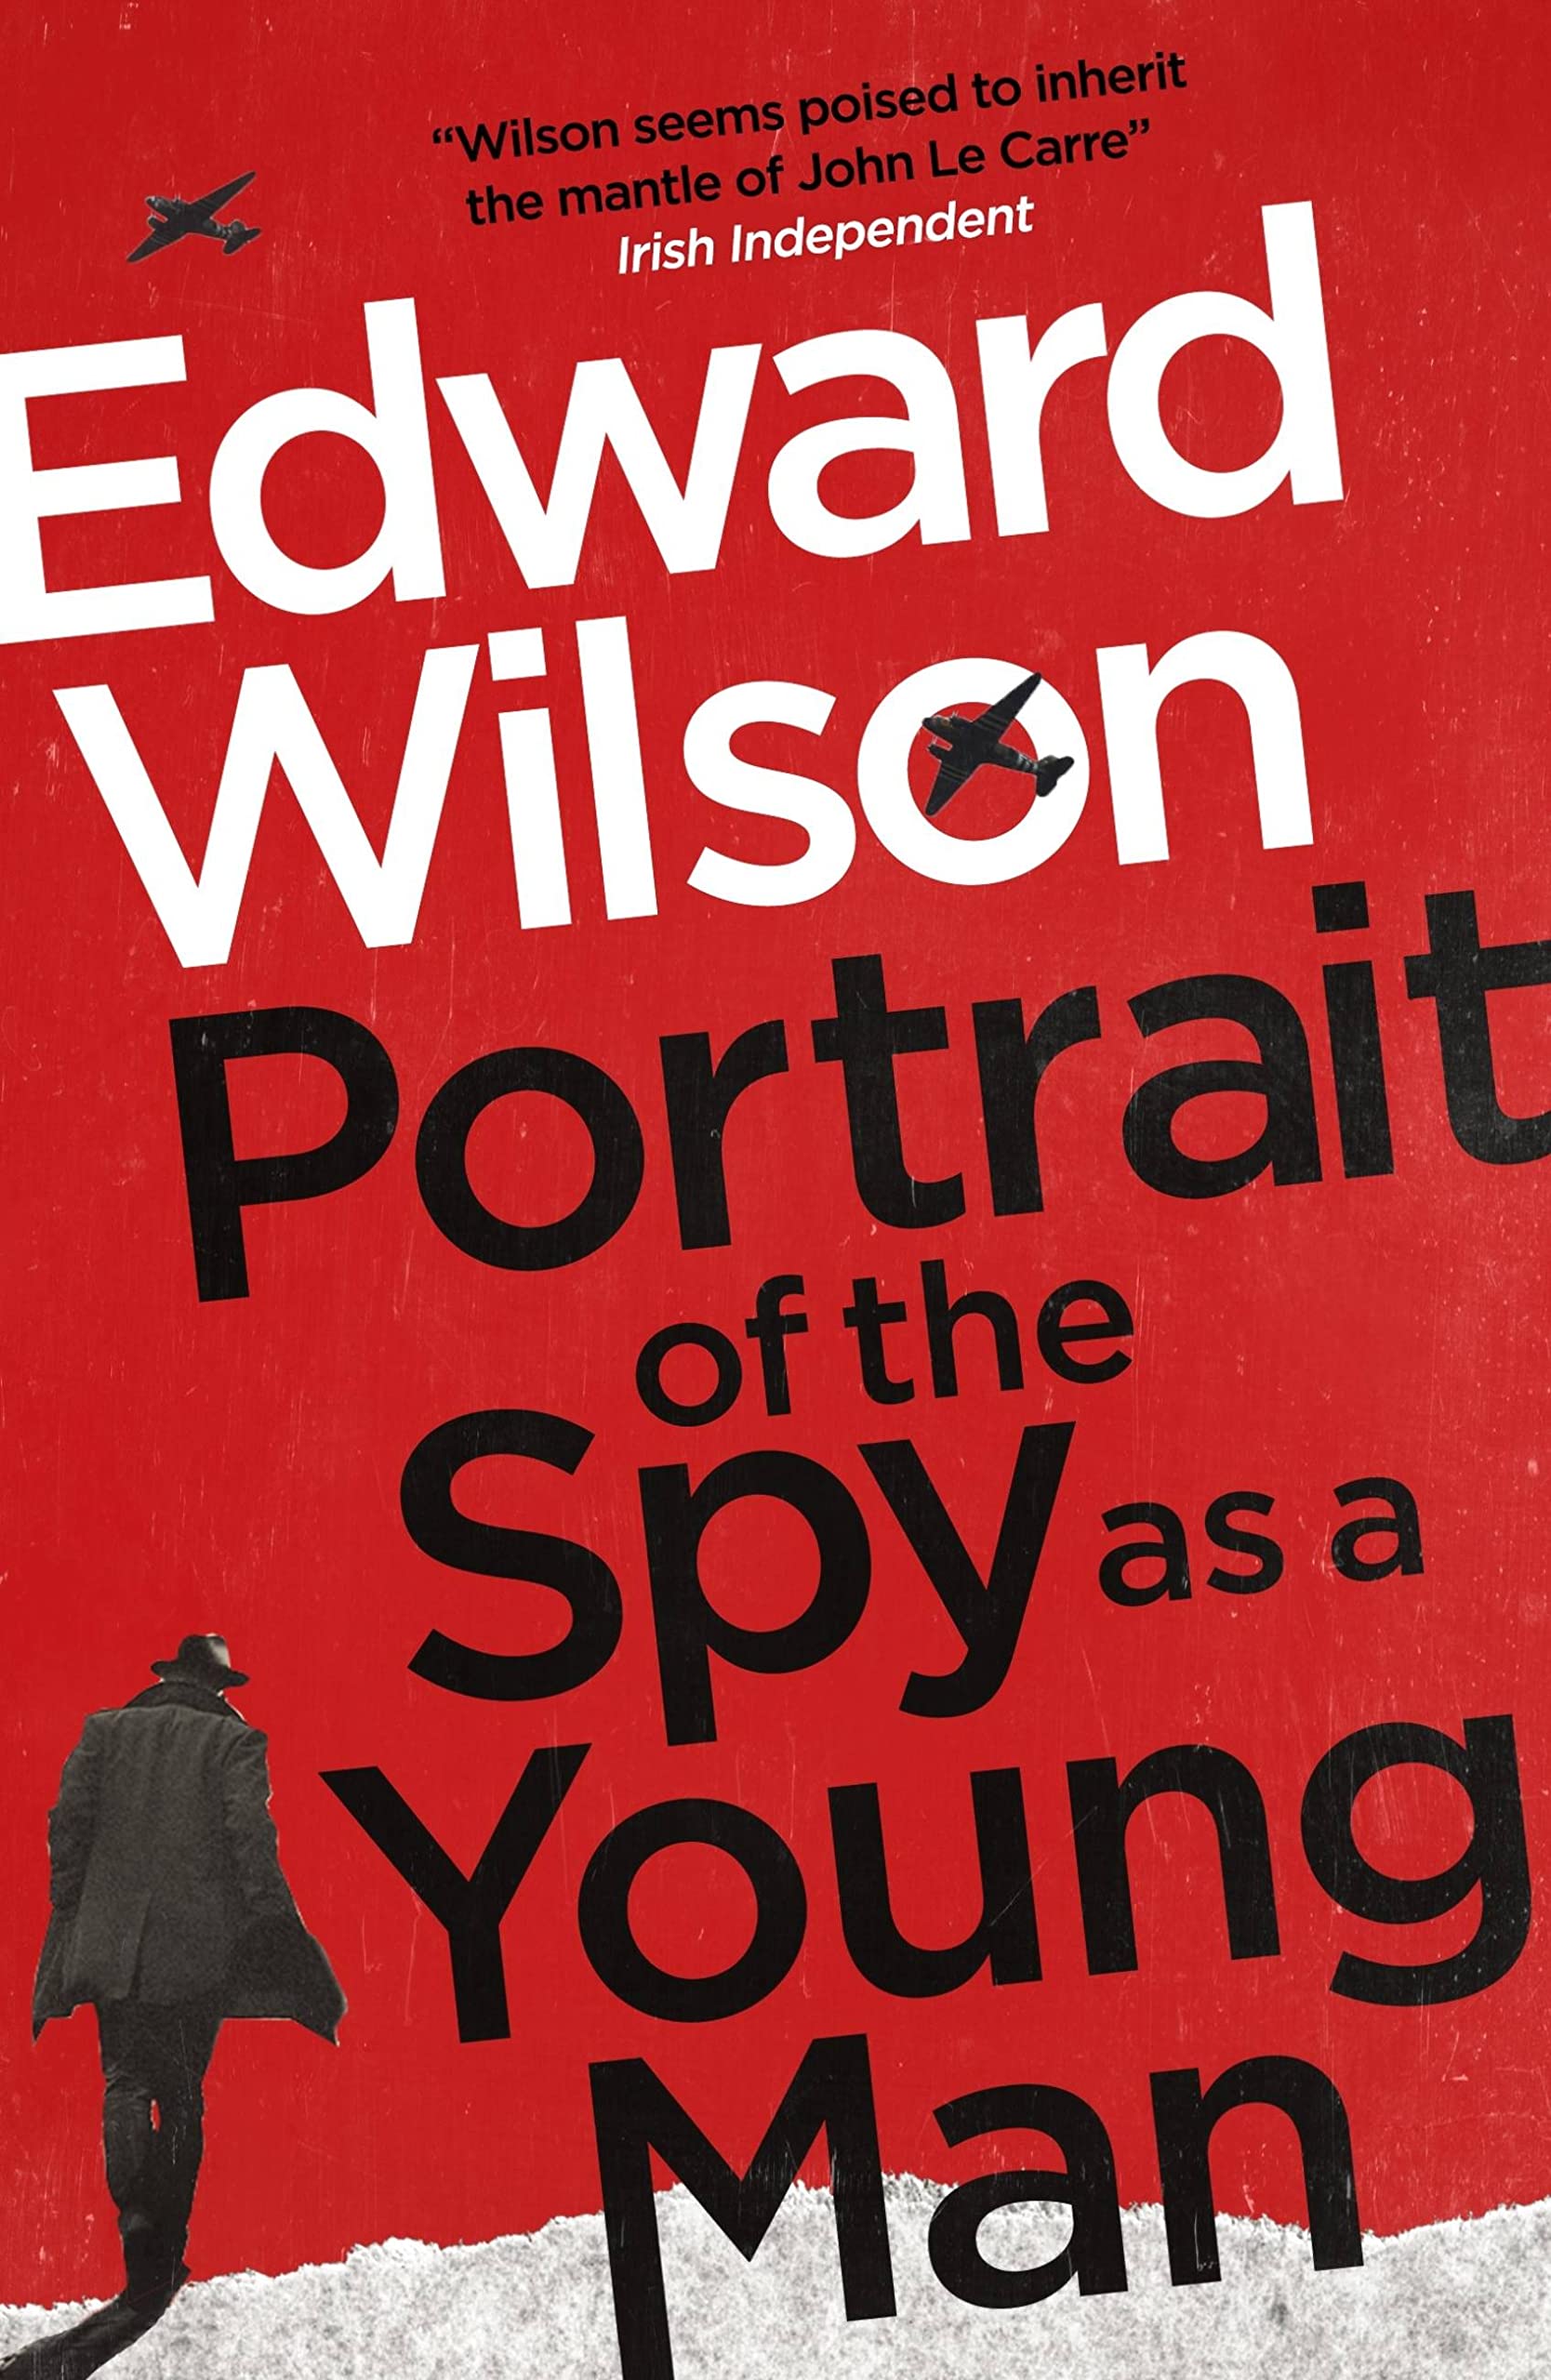 Portrait of the Spy as a Young Man by Edward Wilson.